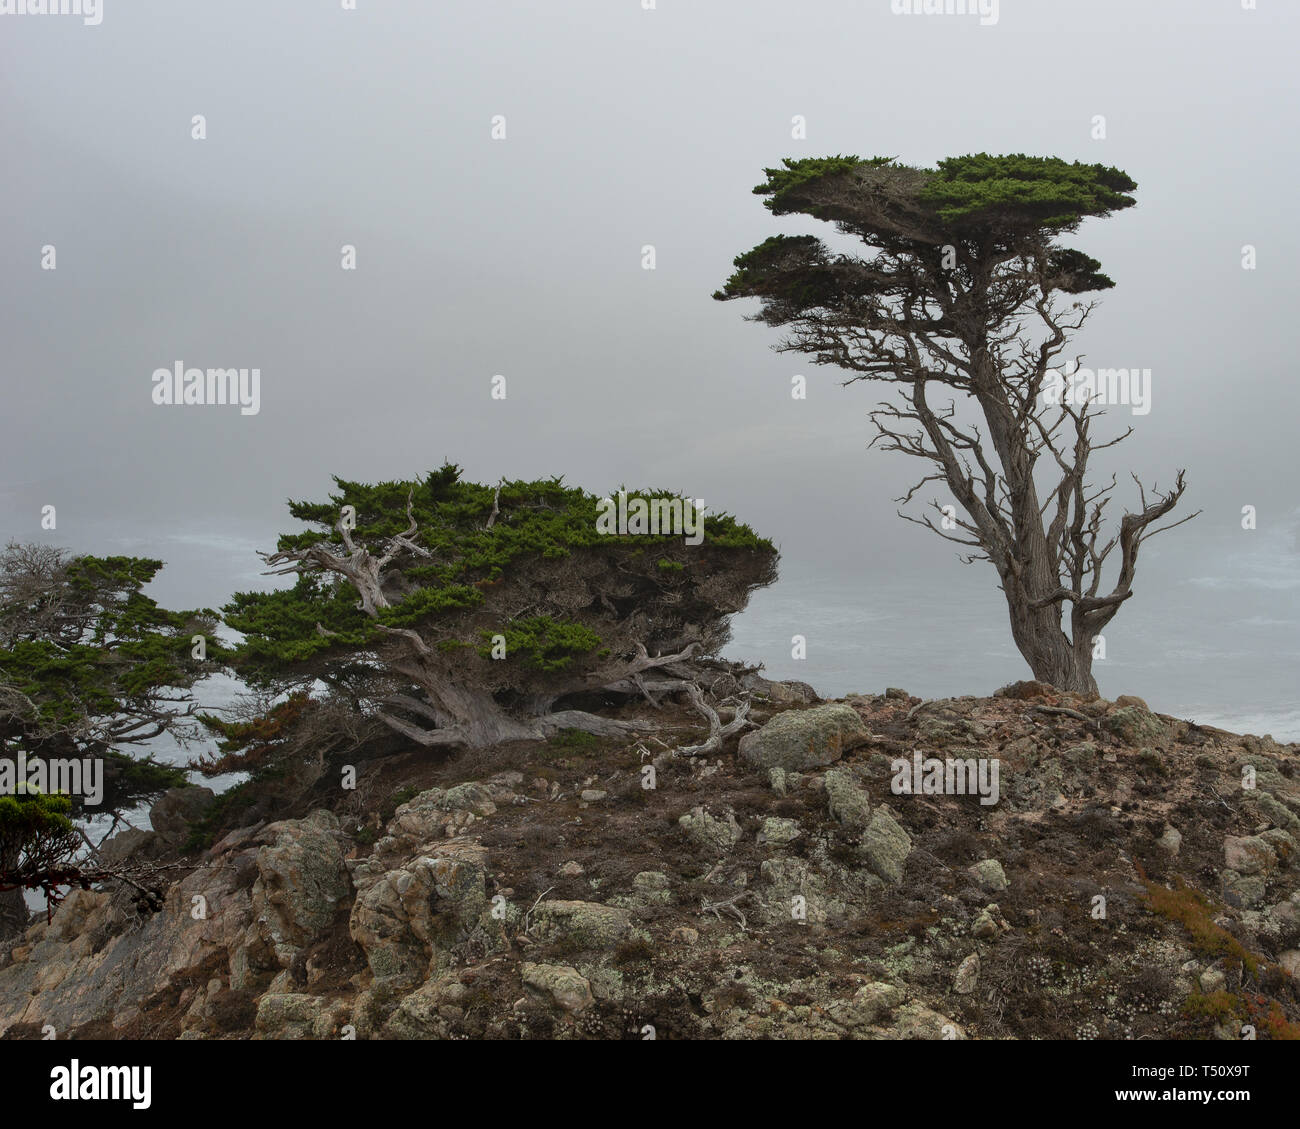 Cypress tree with a marine layer in the Point Lobos state natural reserve. A must see if visiting Monterey or Carmel area. Stock Photo